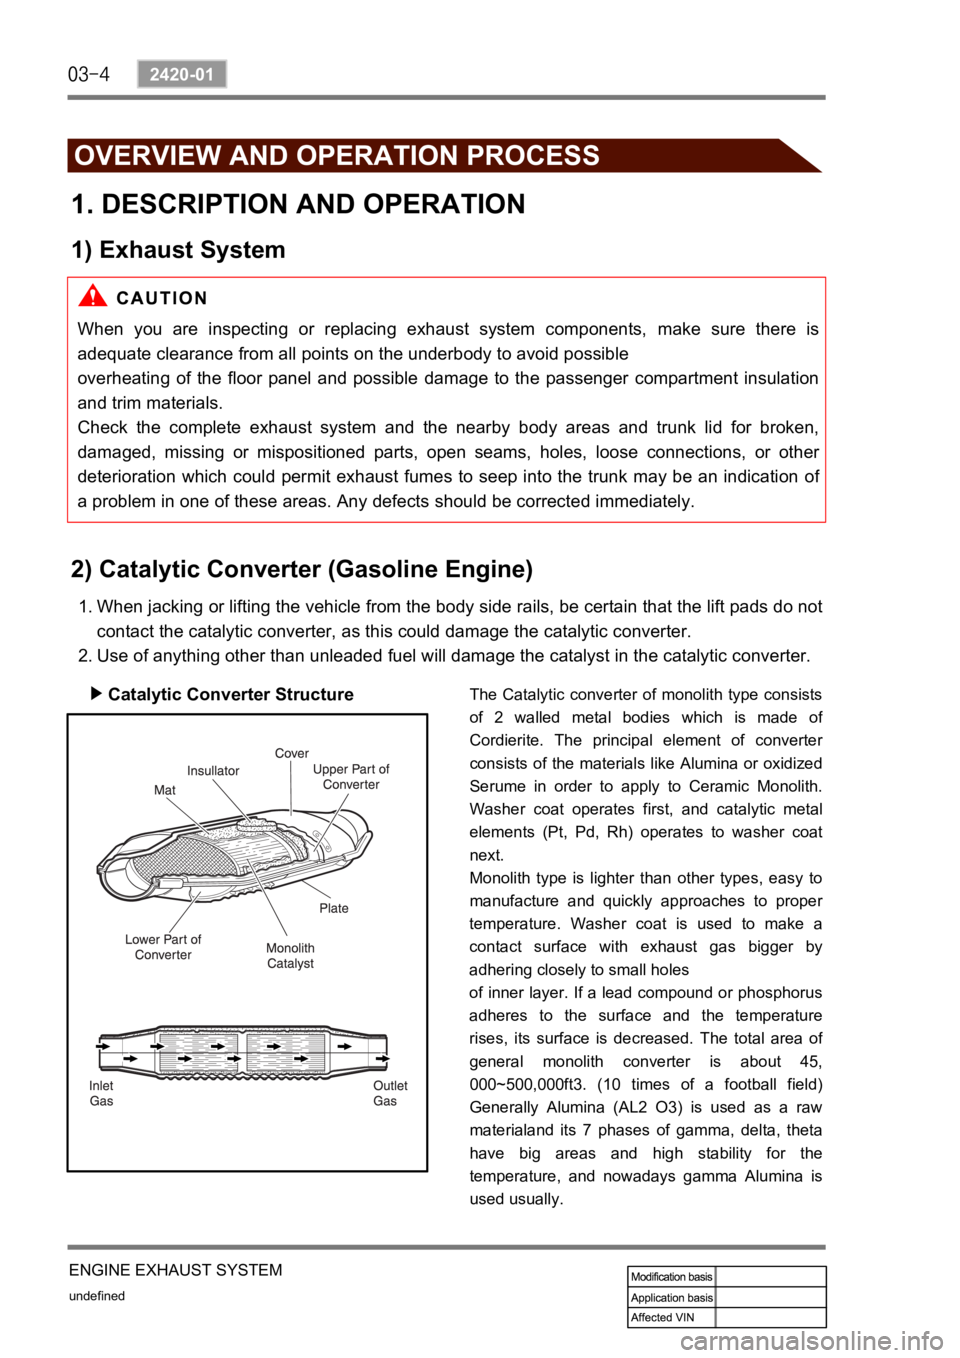 SSANGYONG NEW REXTON 2008  Service Manual undefined
2420-01
ENGINE EXHAUST SYSTEM
OVERVIEW AND OPERATION PROCESS
1. DESCRIPTION AND OPERATION
1) Exhaust System
When  you  are  inspecting  or  replacing  exhaust  system  components,  make  sur